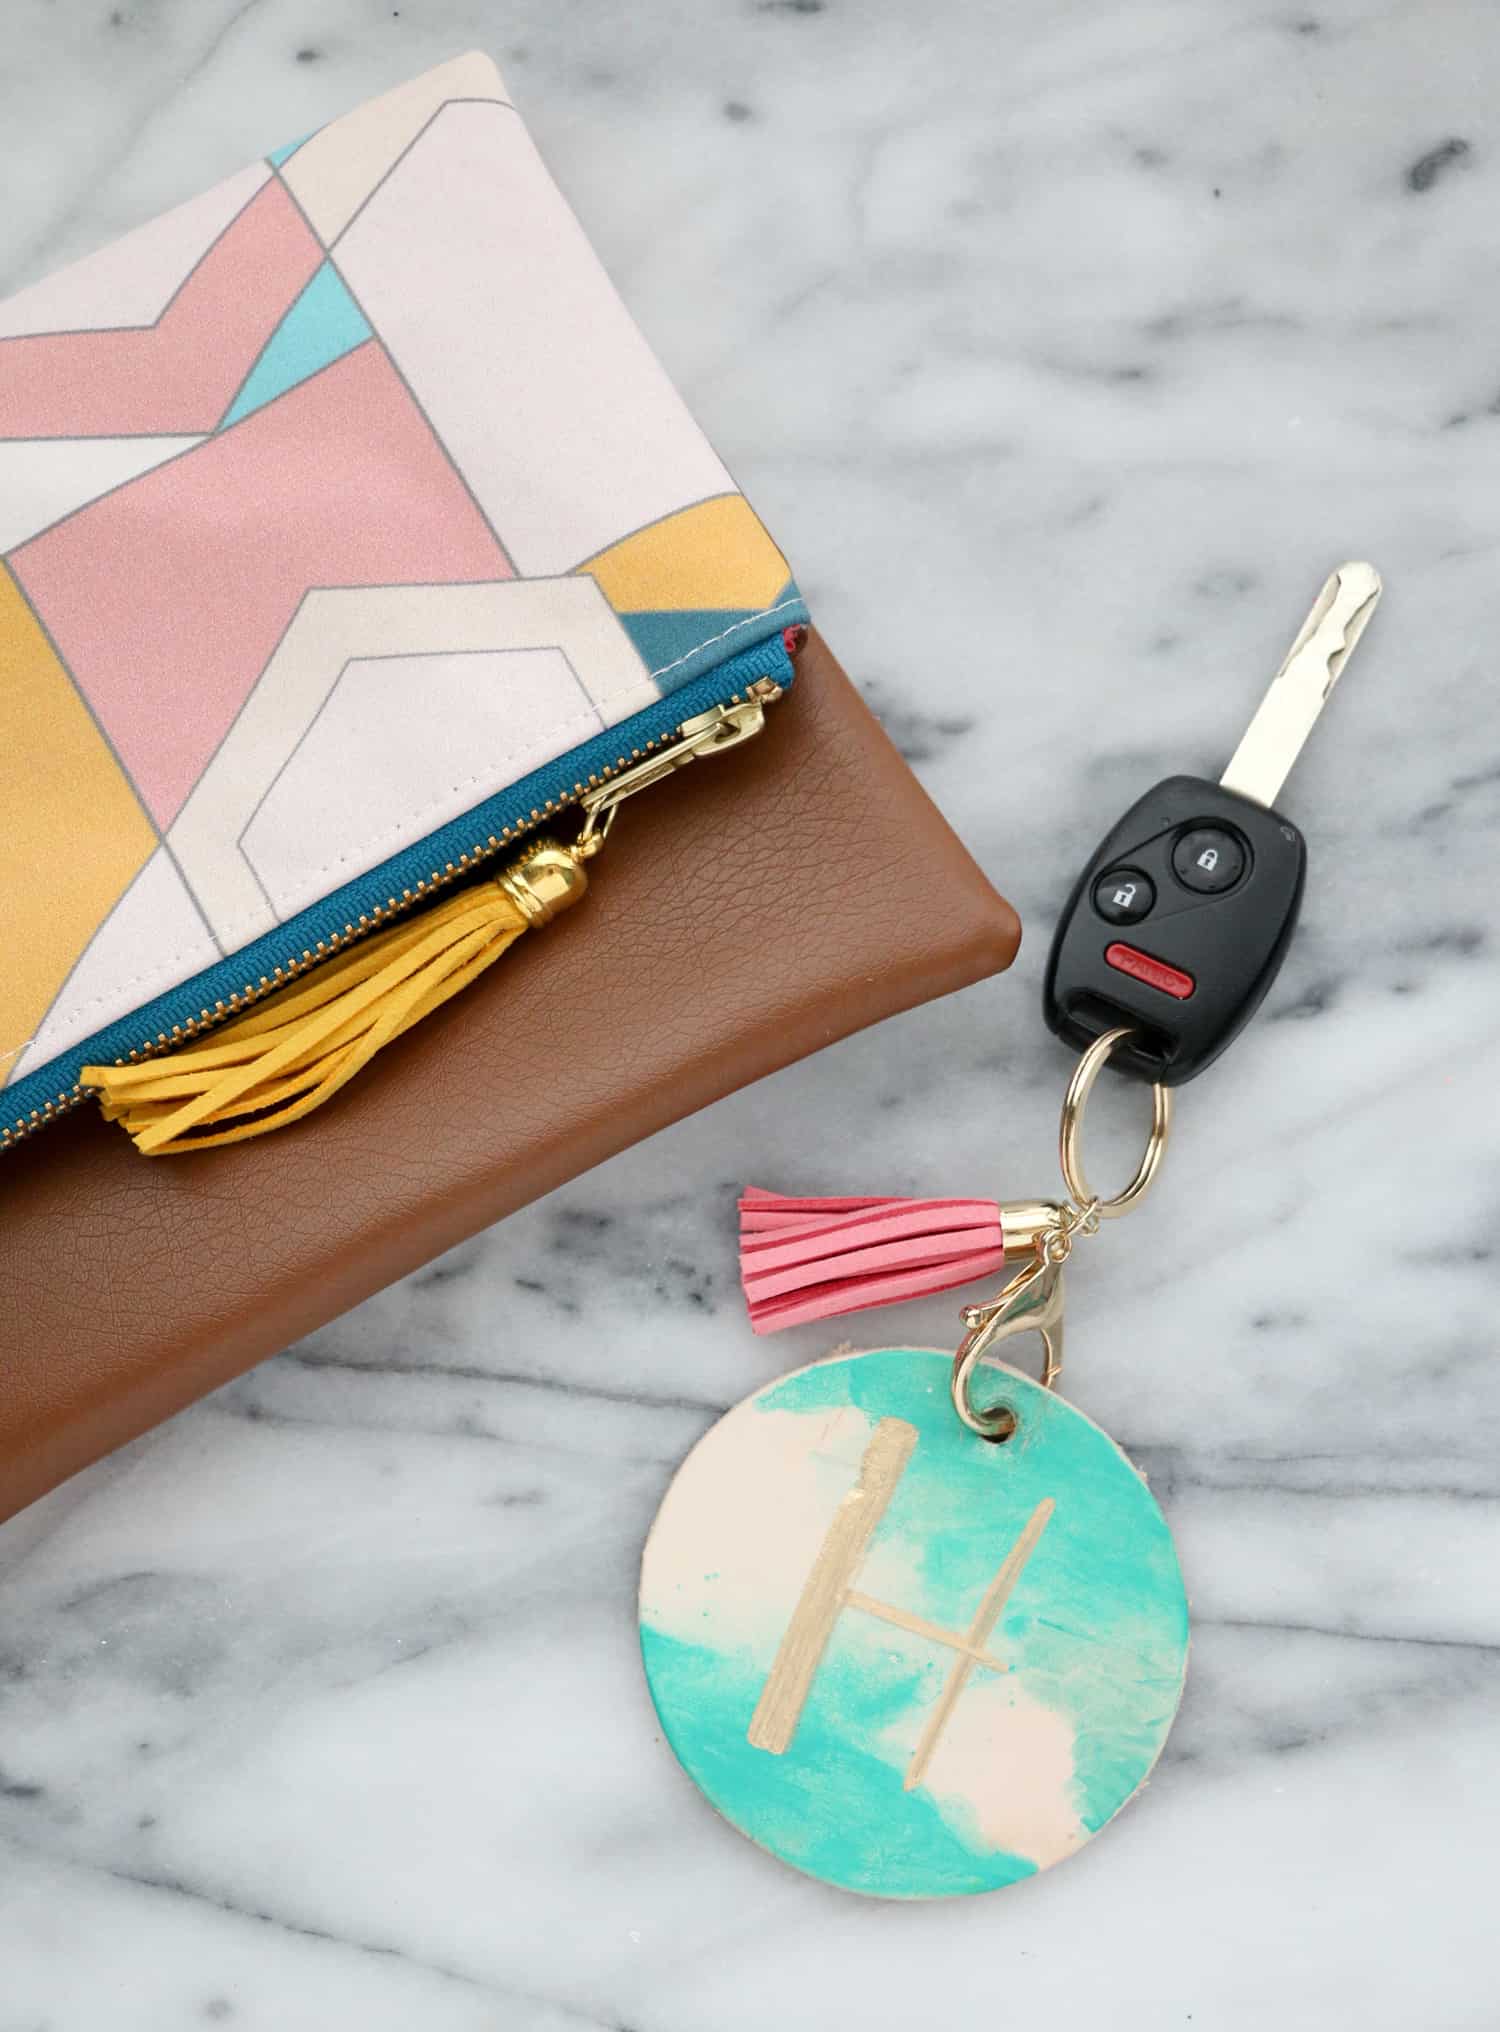 Make your own watercolor luggage tags